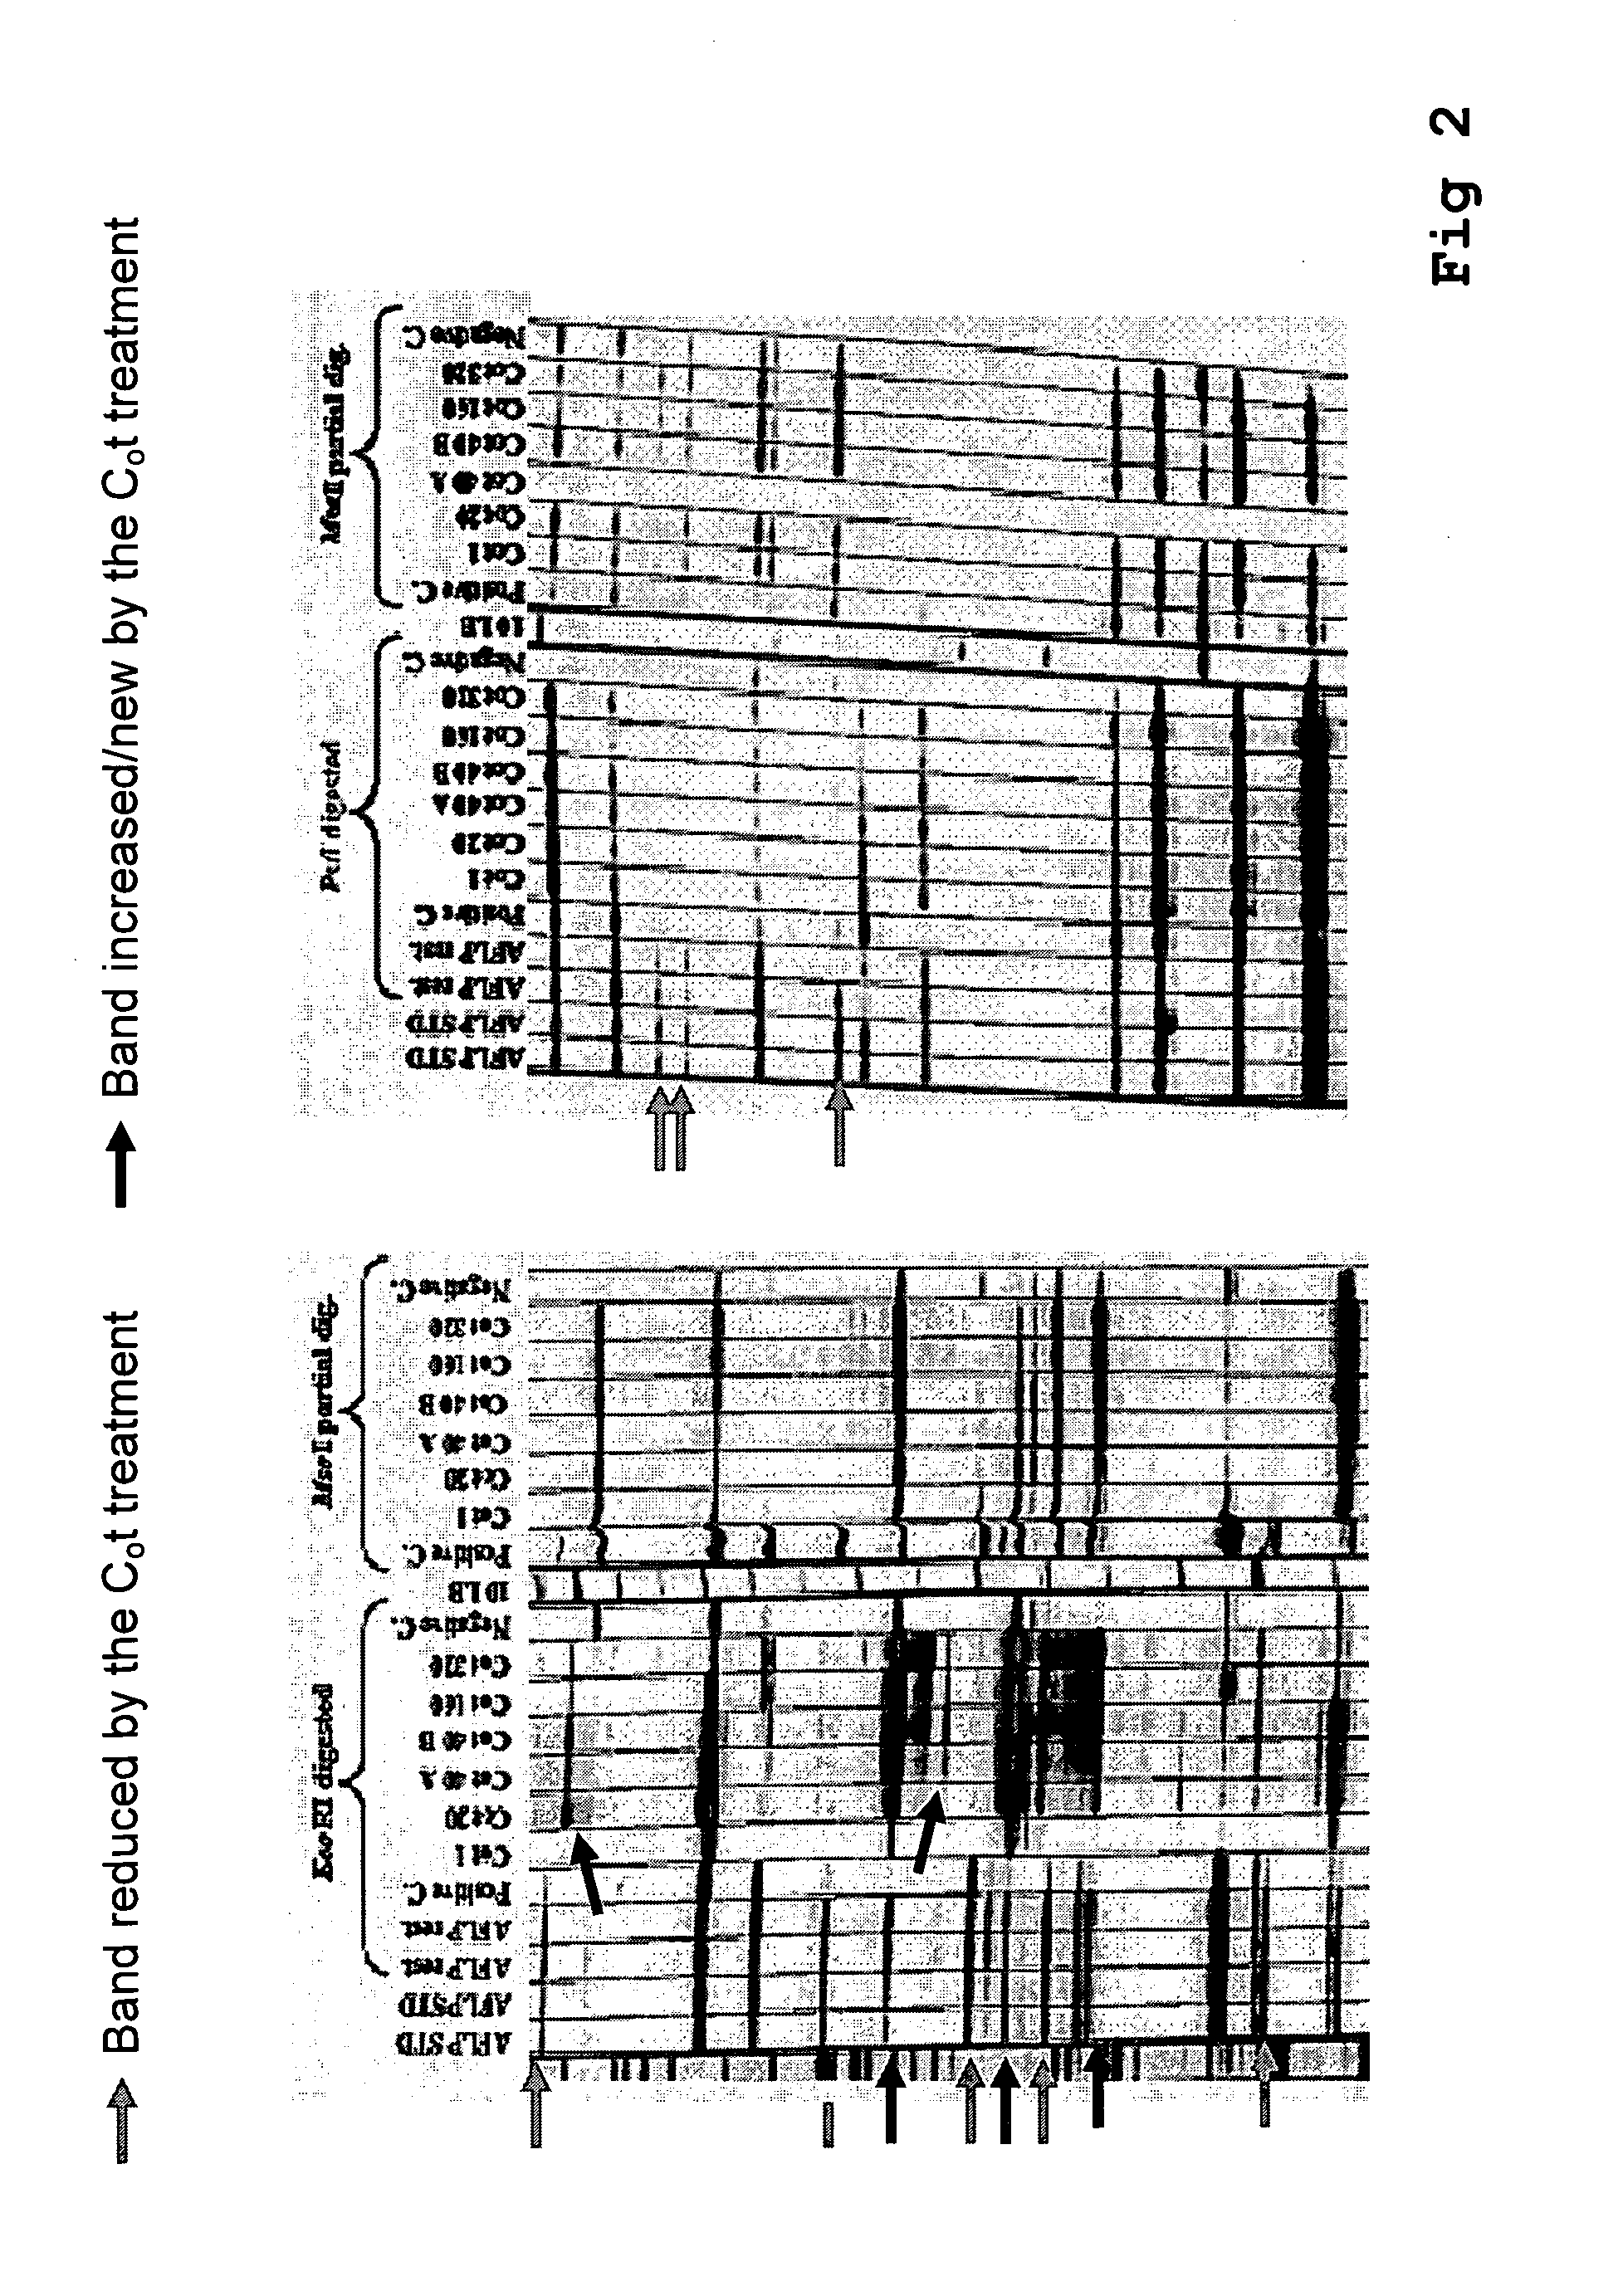 Method for the reduction of repetitive sequences in adapter-ligated restriction fragments